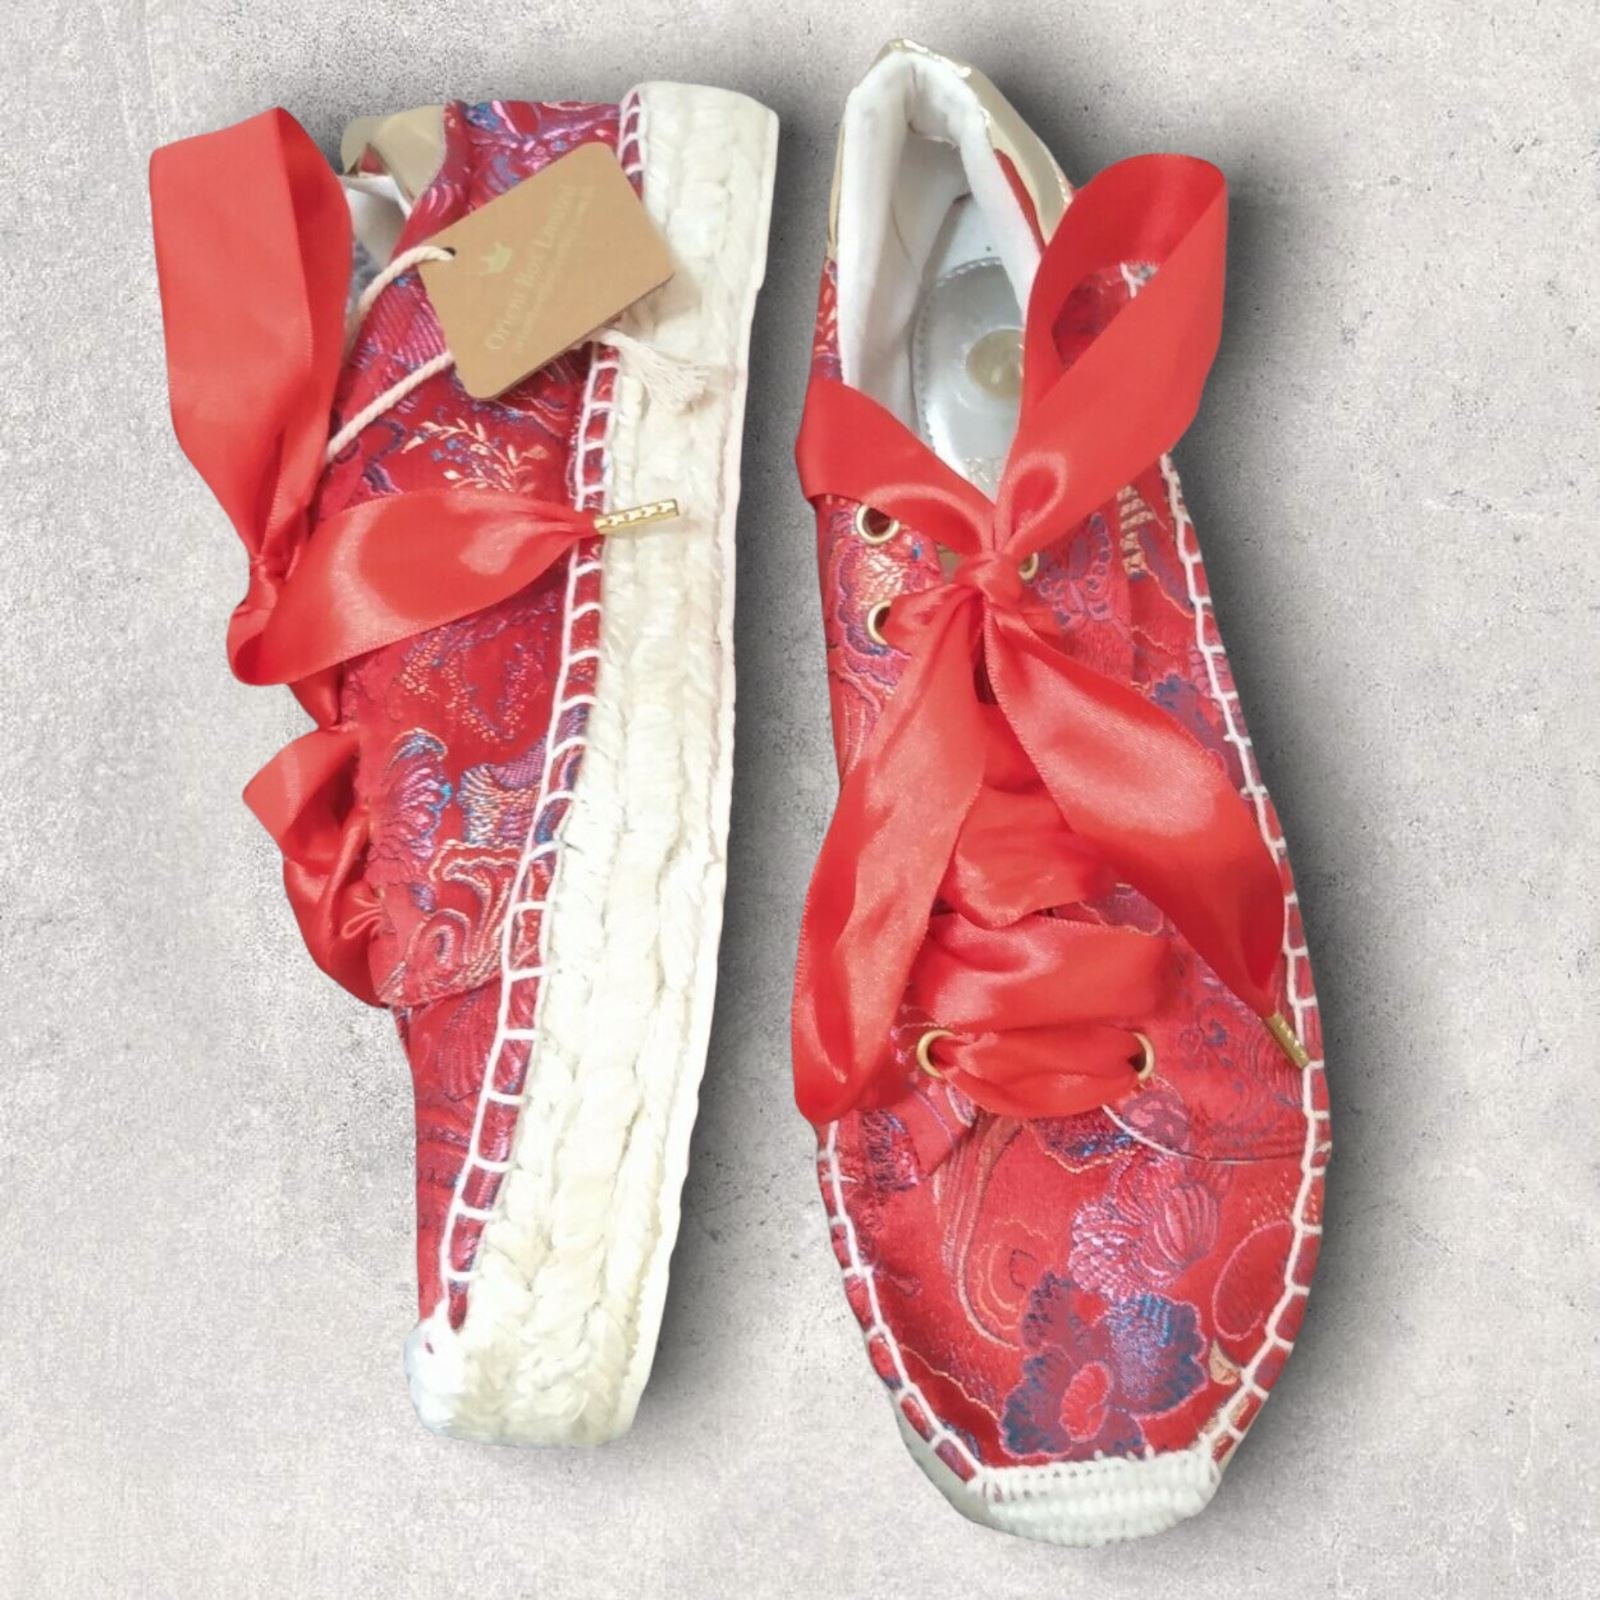 Replay Floral Red Embroidered Orient Box Chinese Espadrilles Trainers UK 7 EU 40 Timeless Fashions